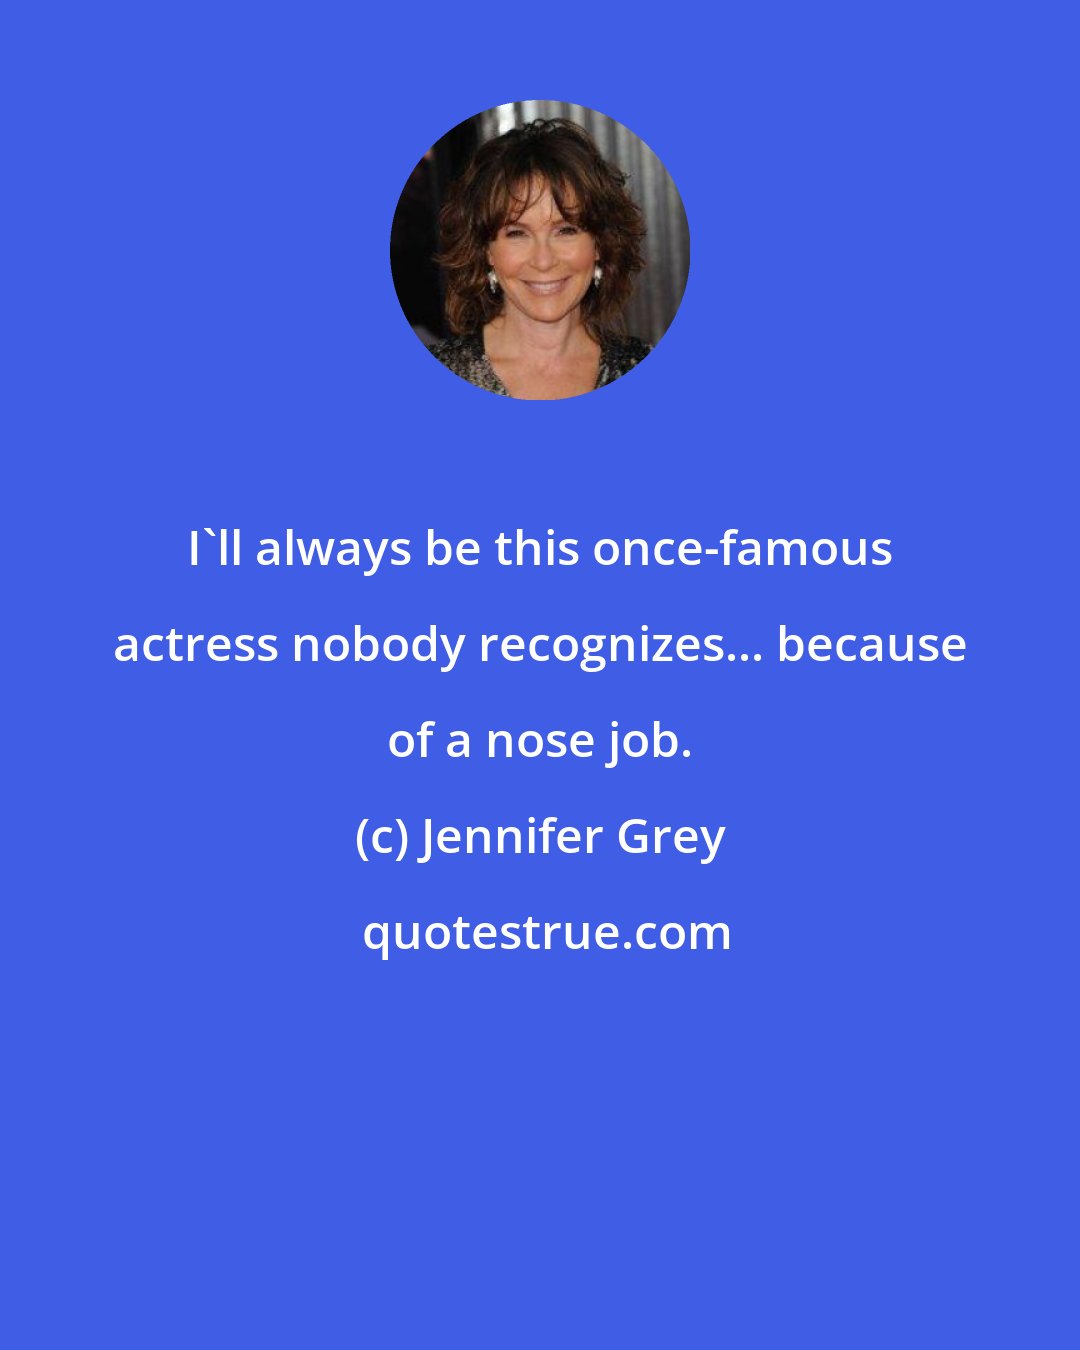 Jennifer Grey: I'll always be this once-famous actress nobody recognizes... because of a nose job.